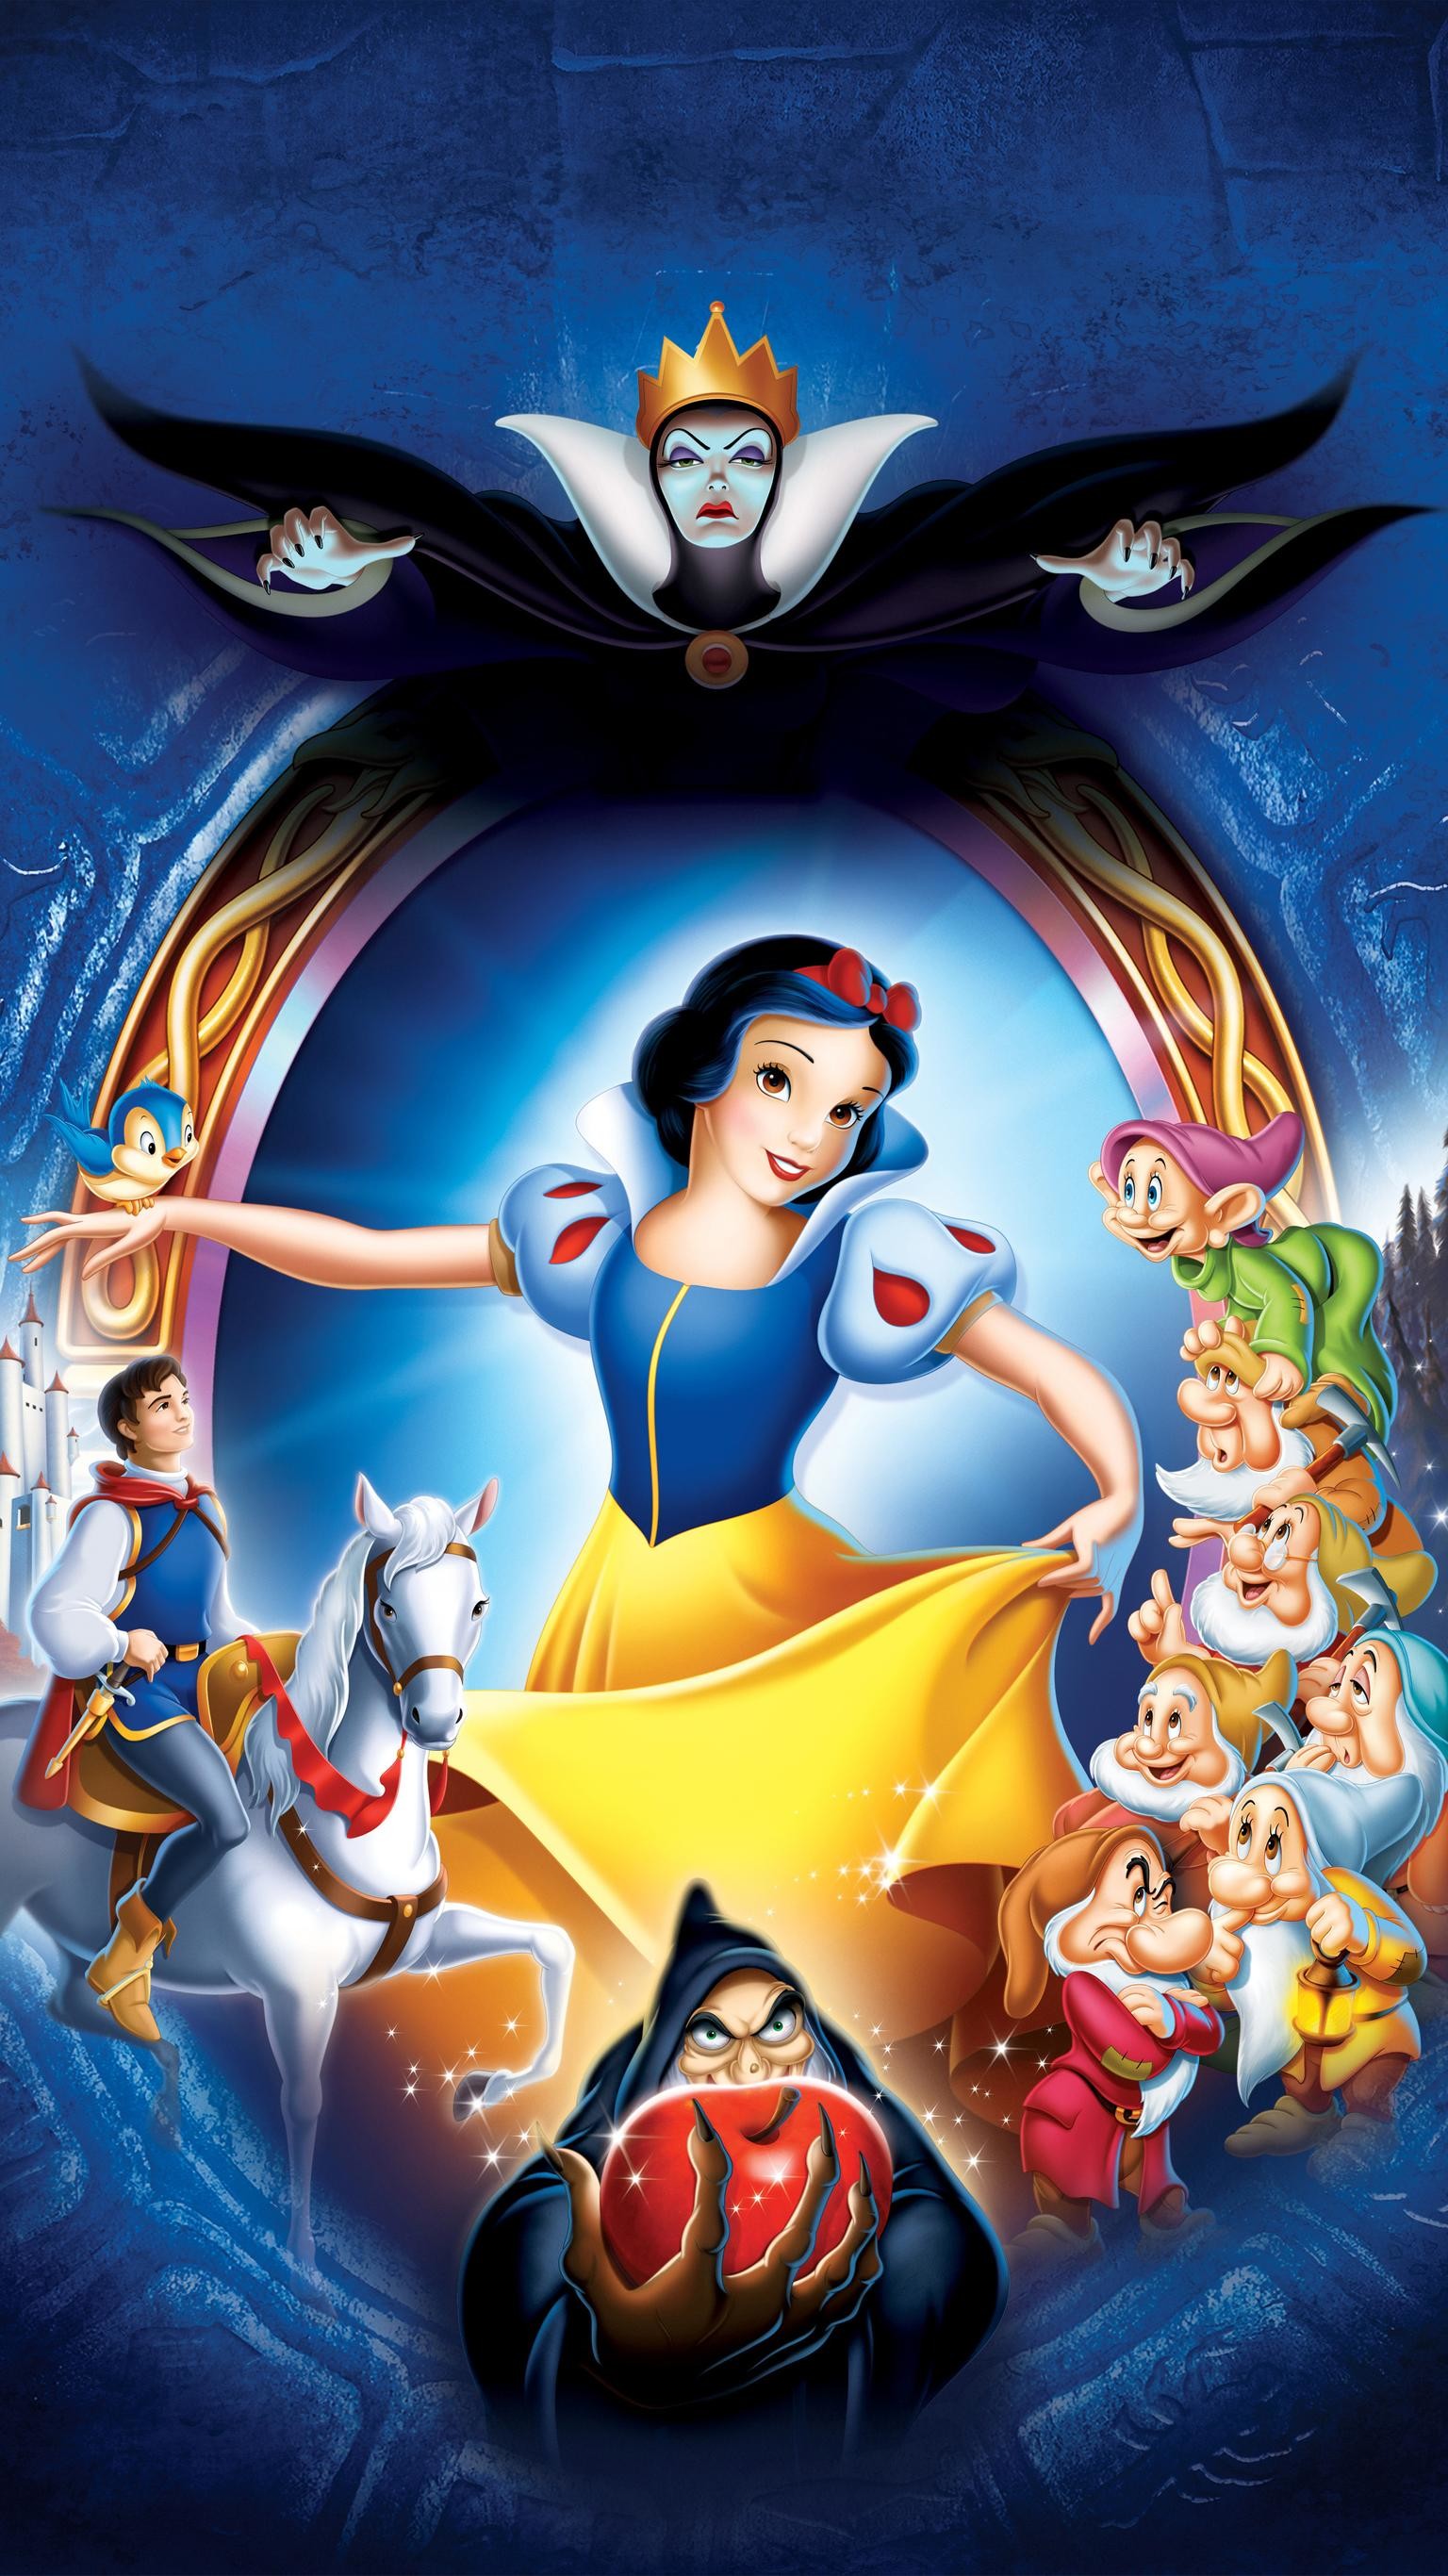 Mobile wallpaper: Snow White, Movie, Snow White And The Seven Dwarfs,  1467375 download the picture for free.